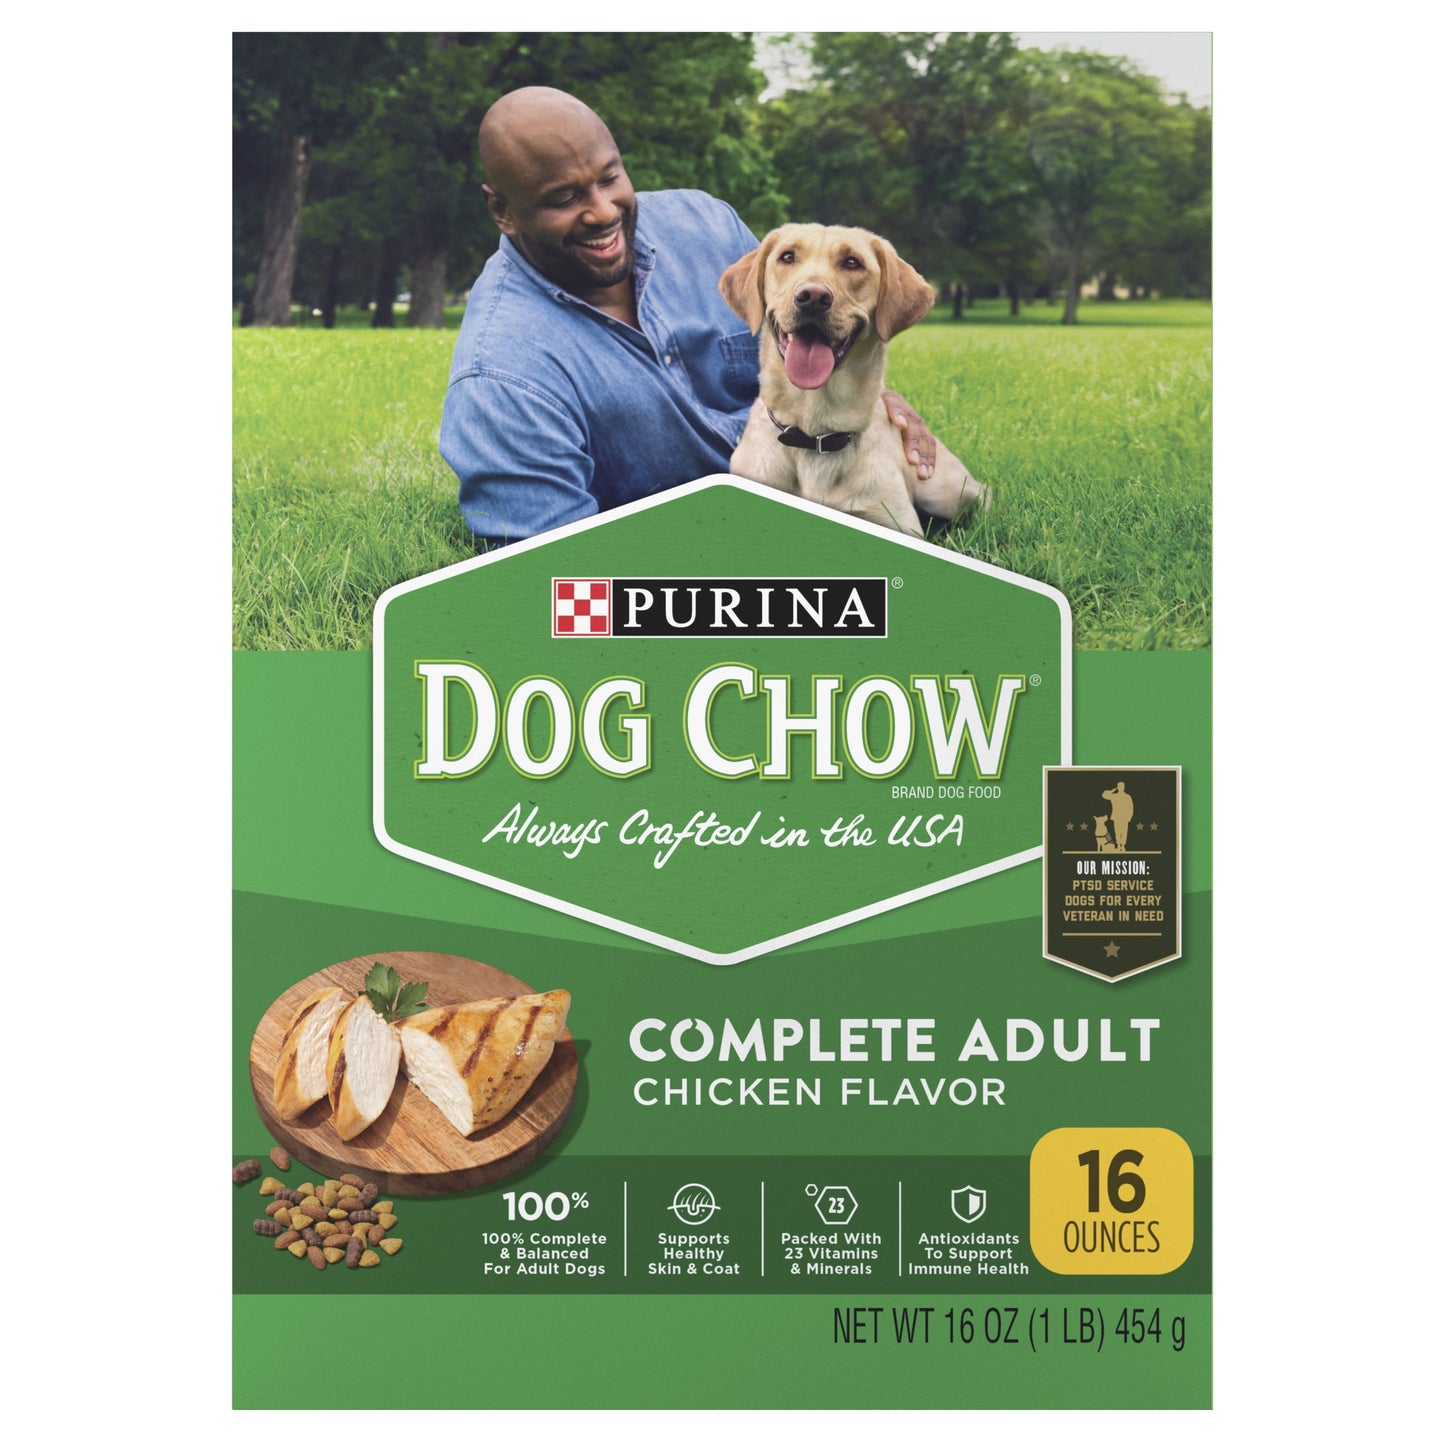 Purina Dog Chow Complete Adult Dry Dog Food Kibble With Chicken Flavor, 16 oz. Box